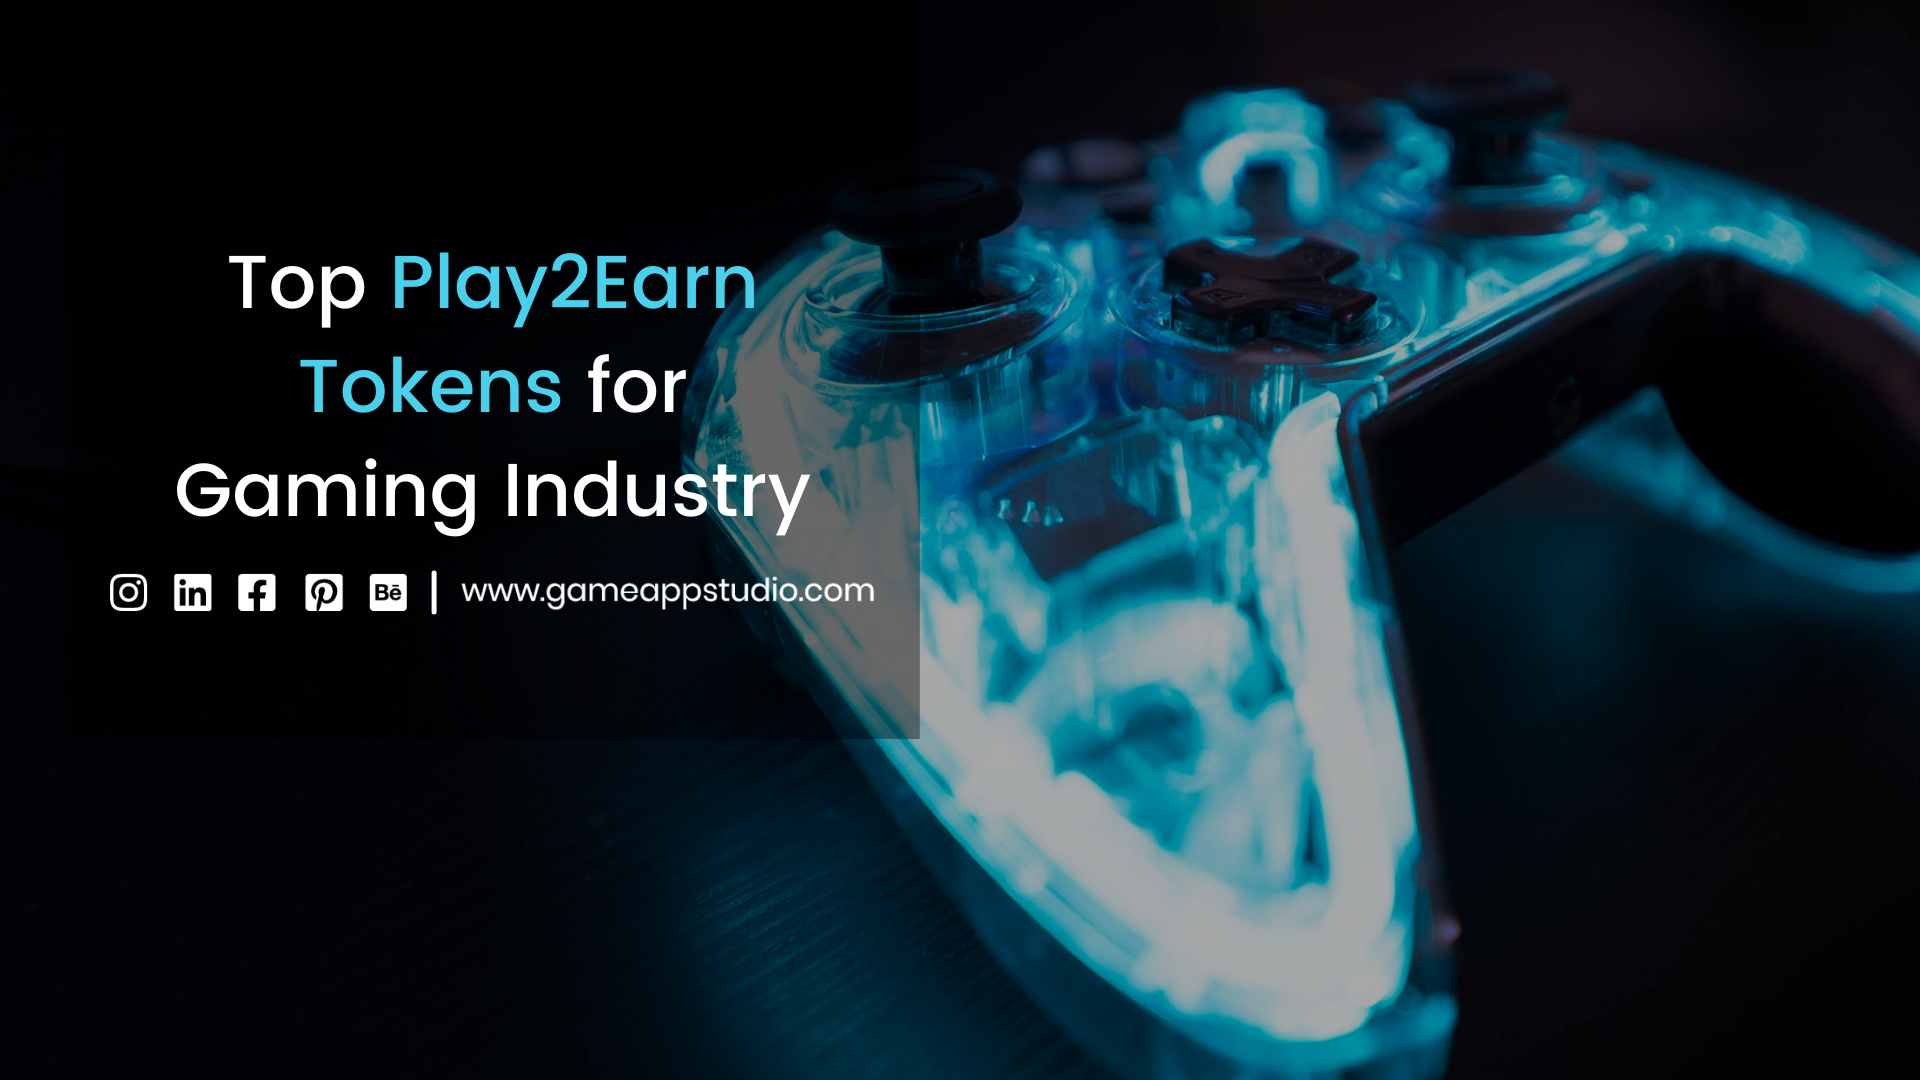 Top Play2Earn Tokens for Gaming Industries 